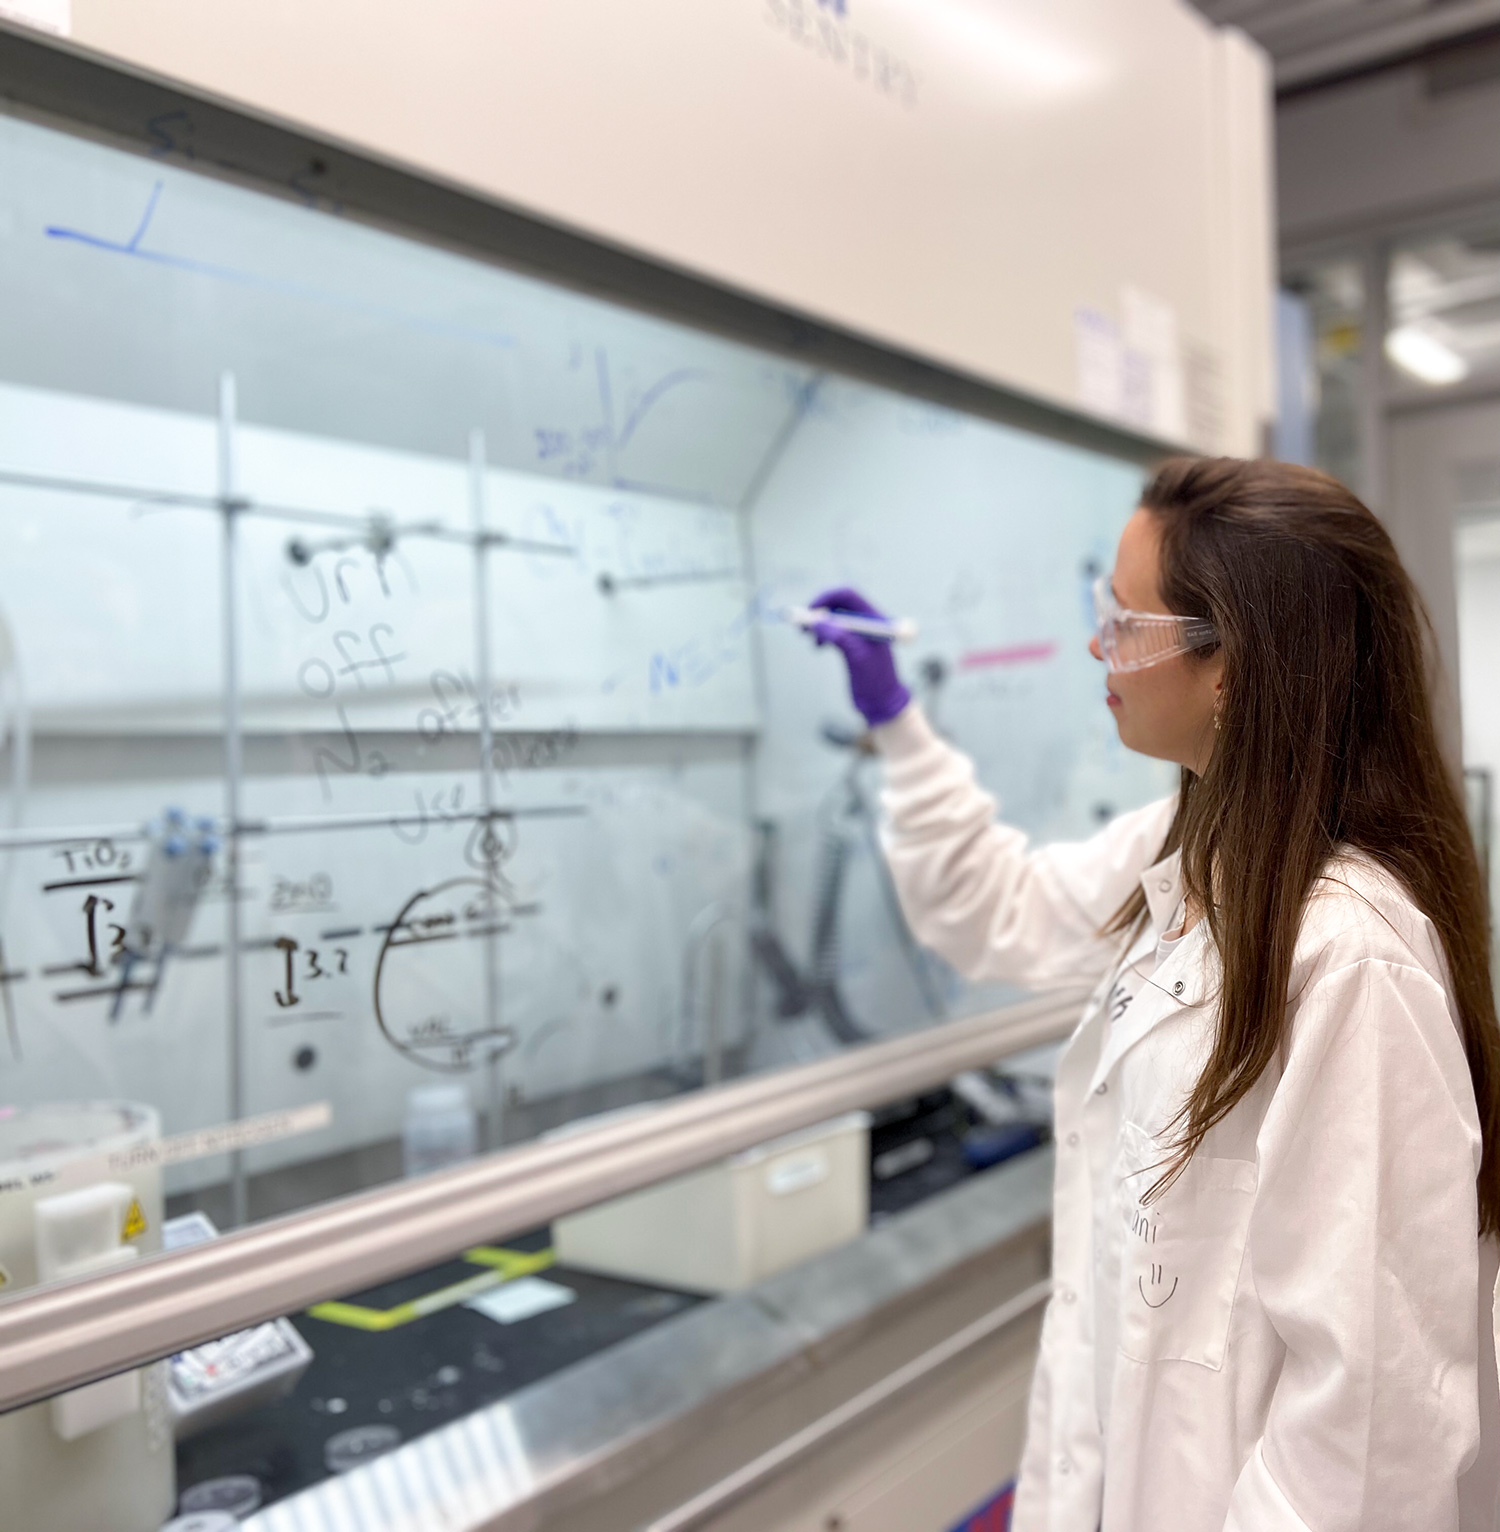 Chemical Engineer Daniela Blanco intently writes out chemical equations on a glass window inside a chemistry lab. She wears traditional lab attire – white lab coat, safety goggles, and plastic gloves.